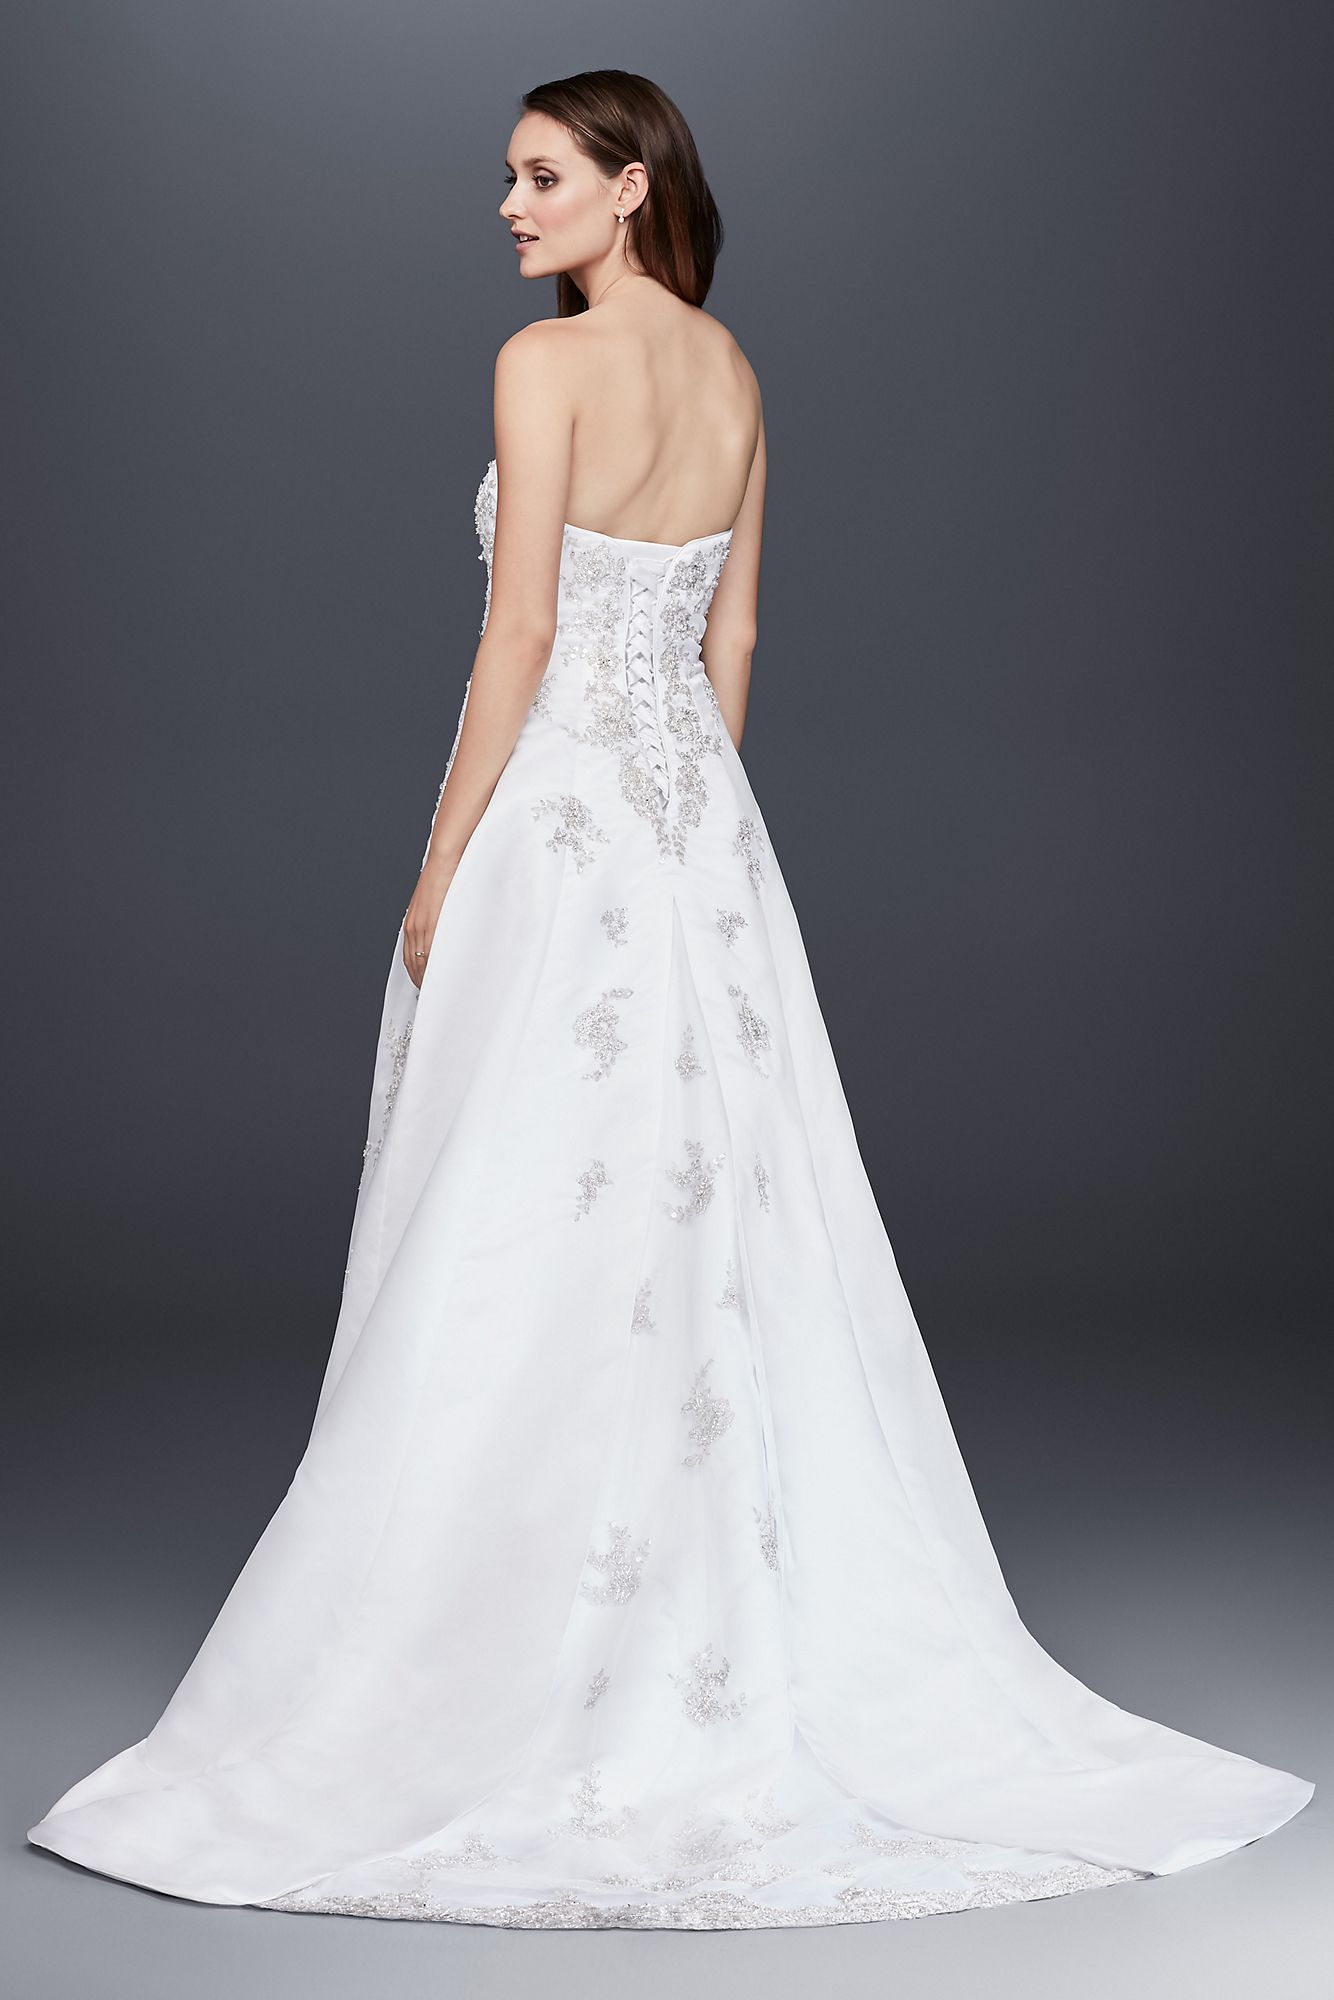 Strapless A-line Wedding Dress with Side Drape   Collection V9665